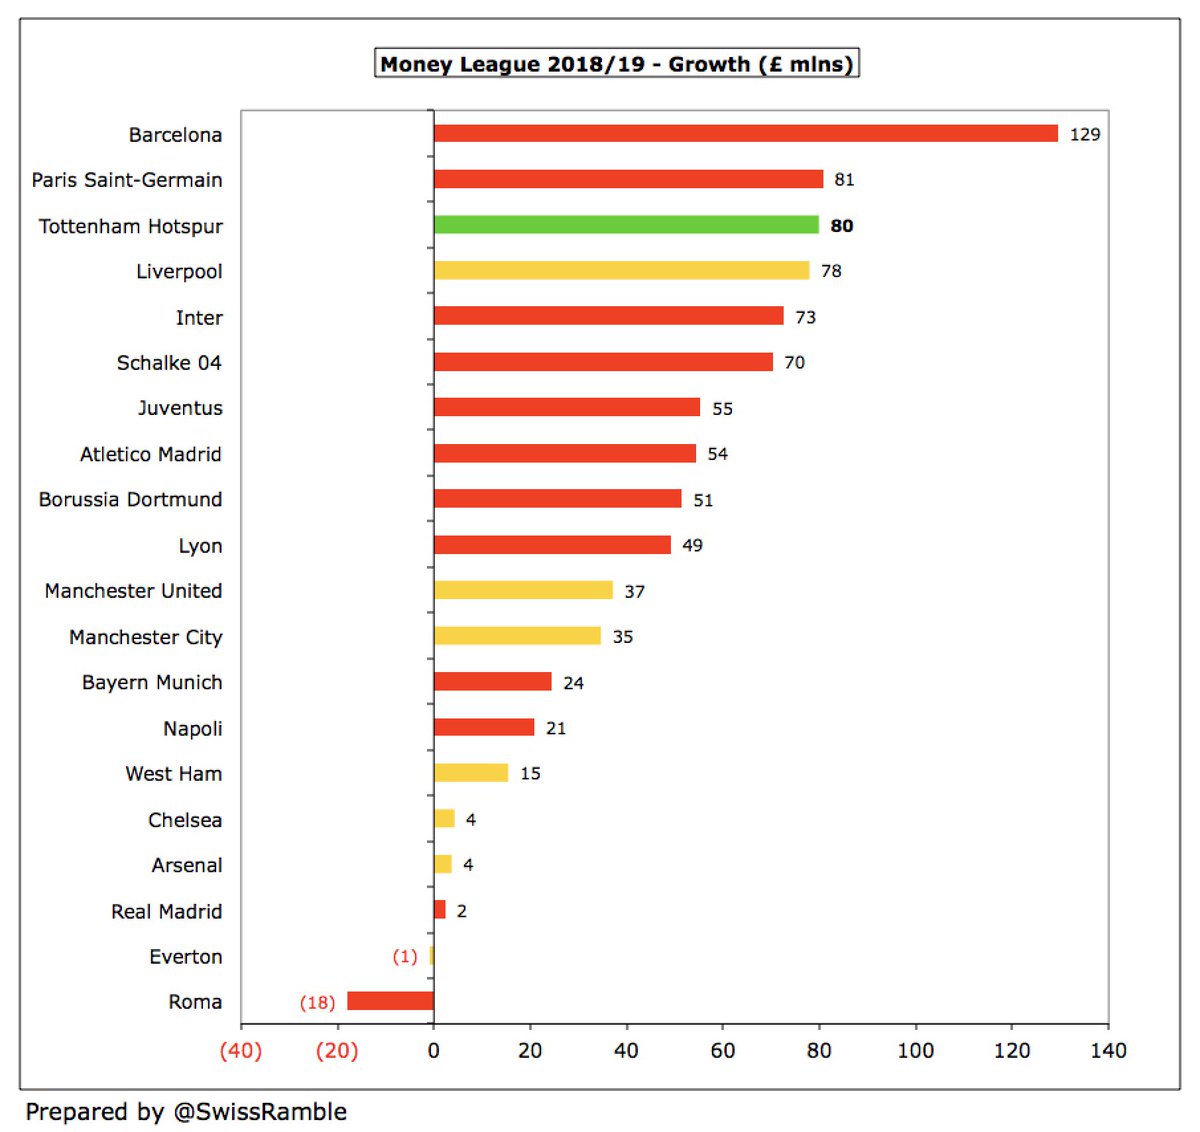  #THFC climbed two places from 10th to 8th in the Deloitte Money League, which ranks clubs globally by revenue. They enjoyed the 3rd highest year-on-year revenue growth with their £80m increase only beaten by Barcelona £129m (mainly by taking merchandising in-house) and PSG £81m